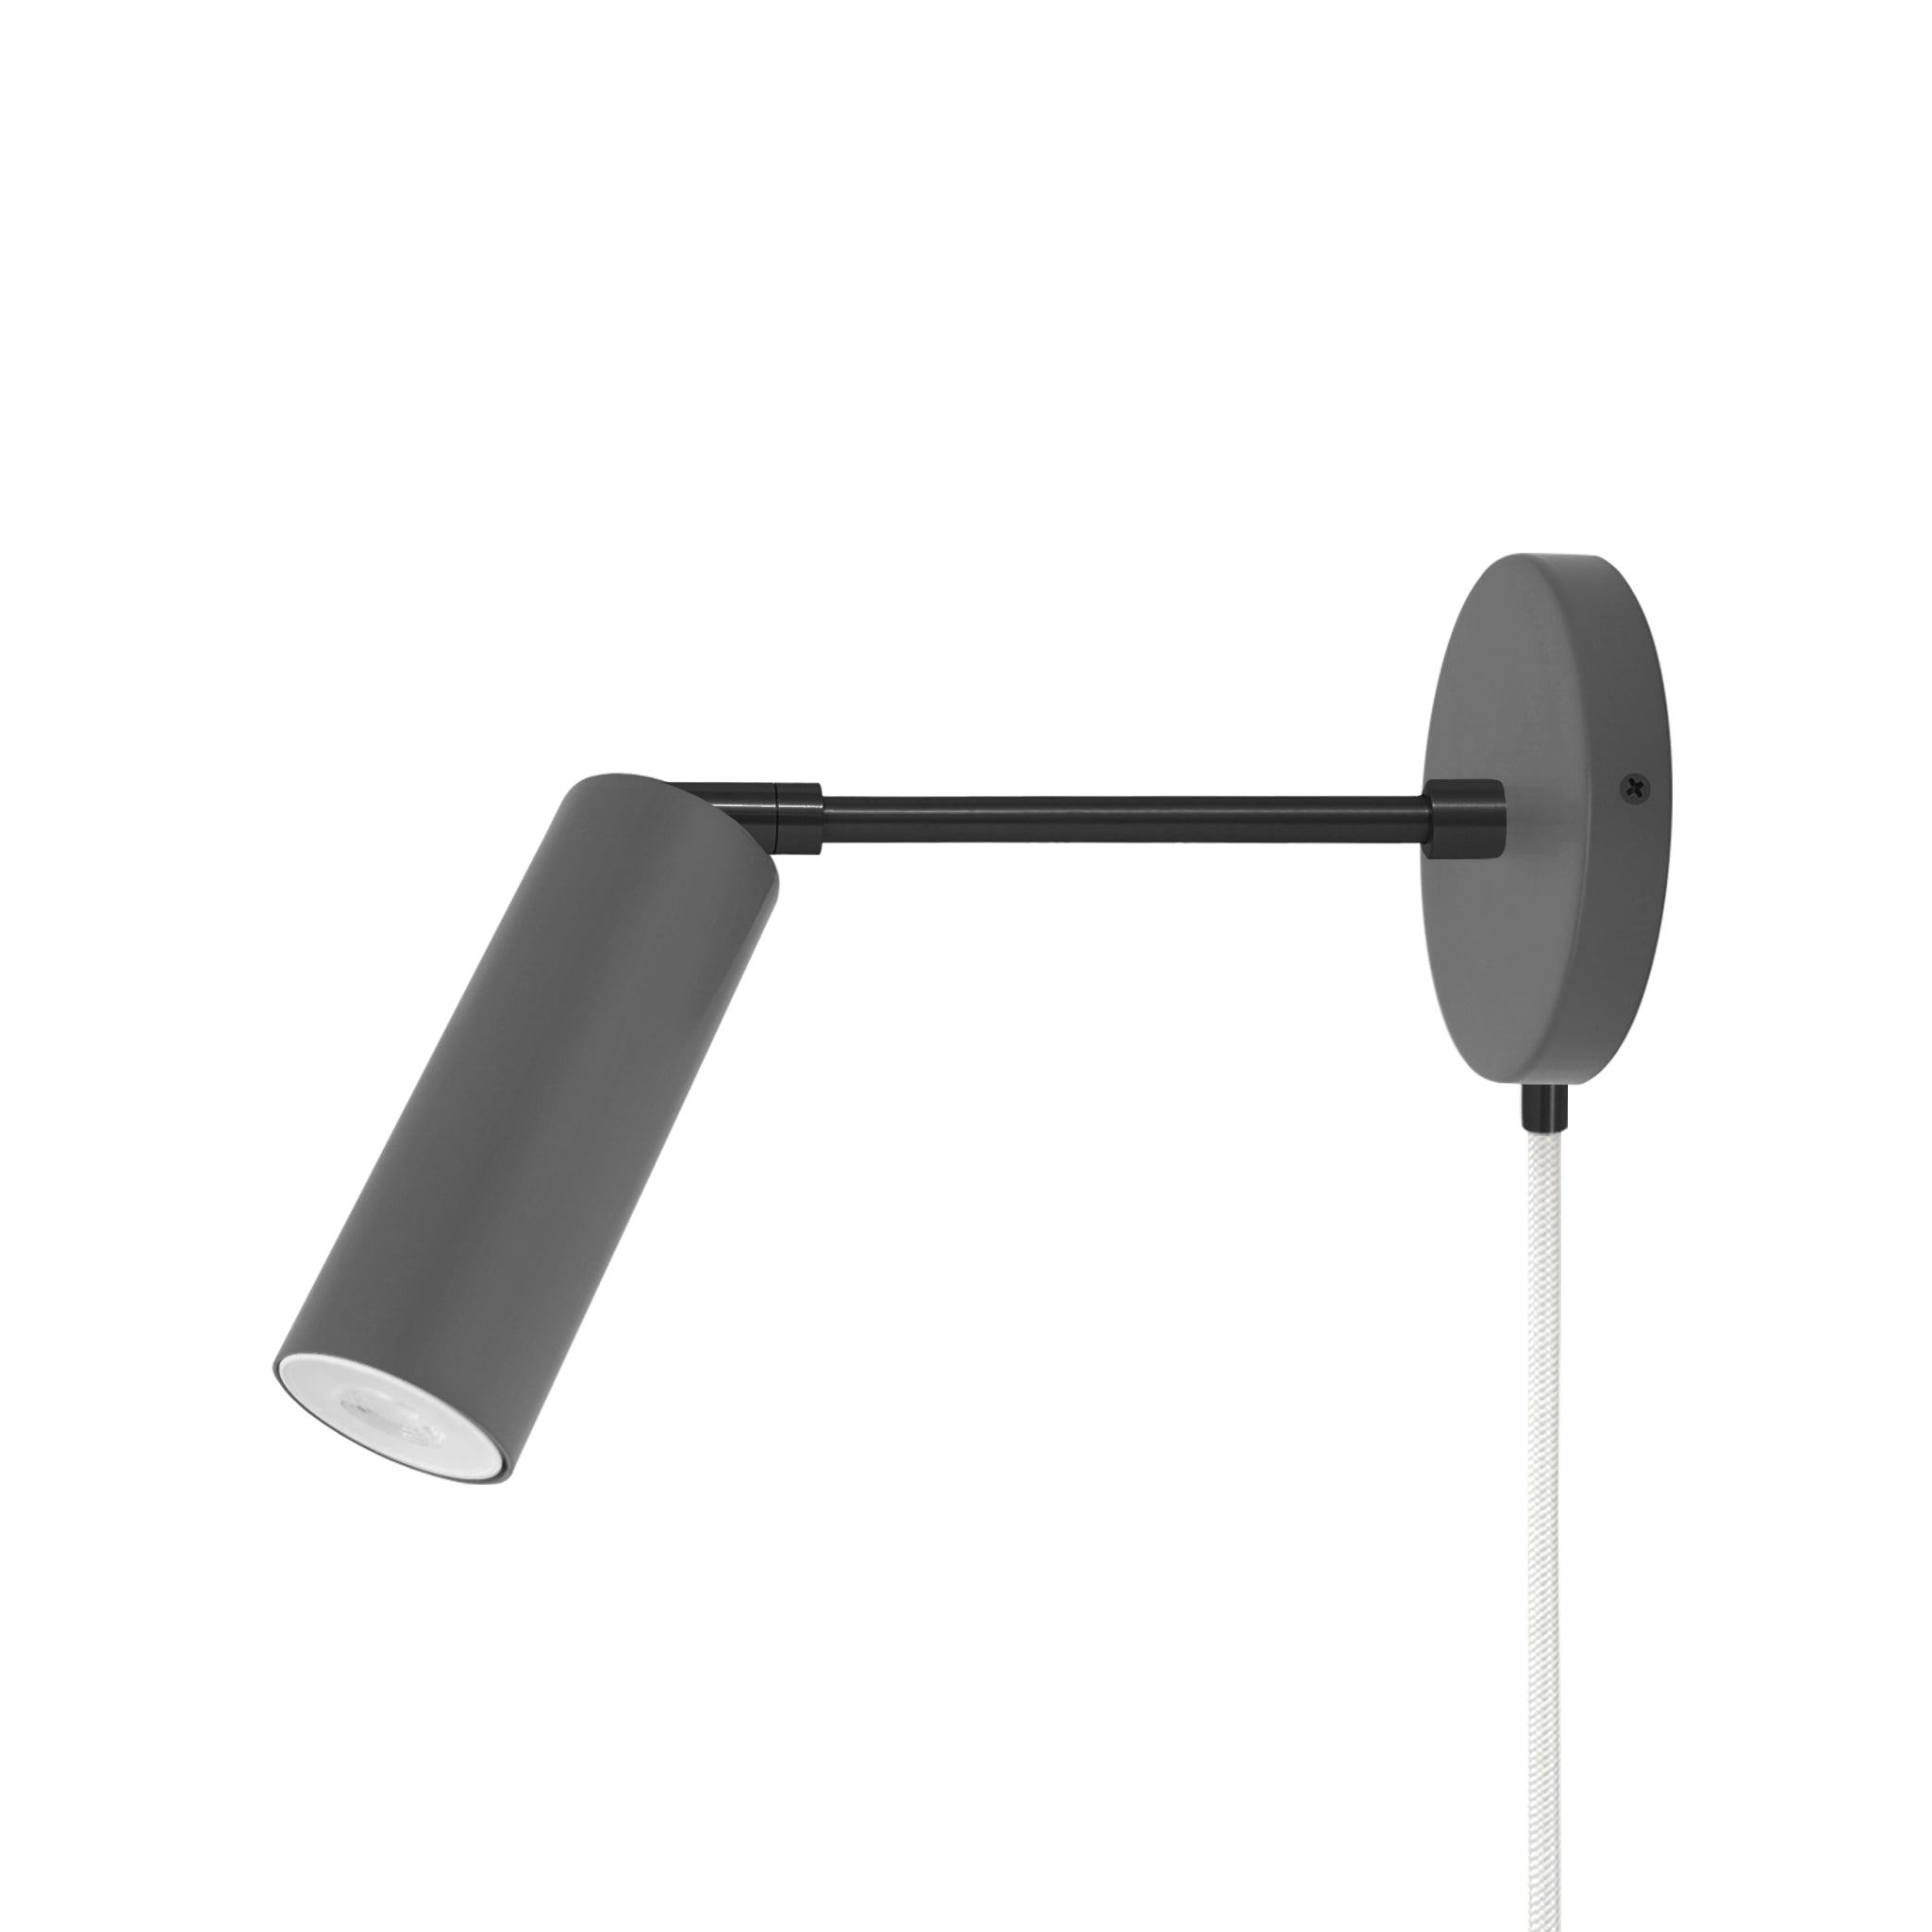 Black and charcoal color Reader plug-in sconce 6" arm Dutton Brown lighting